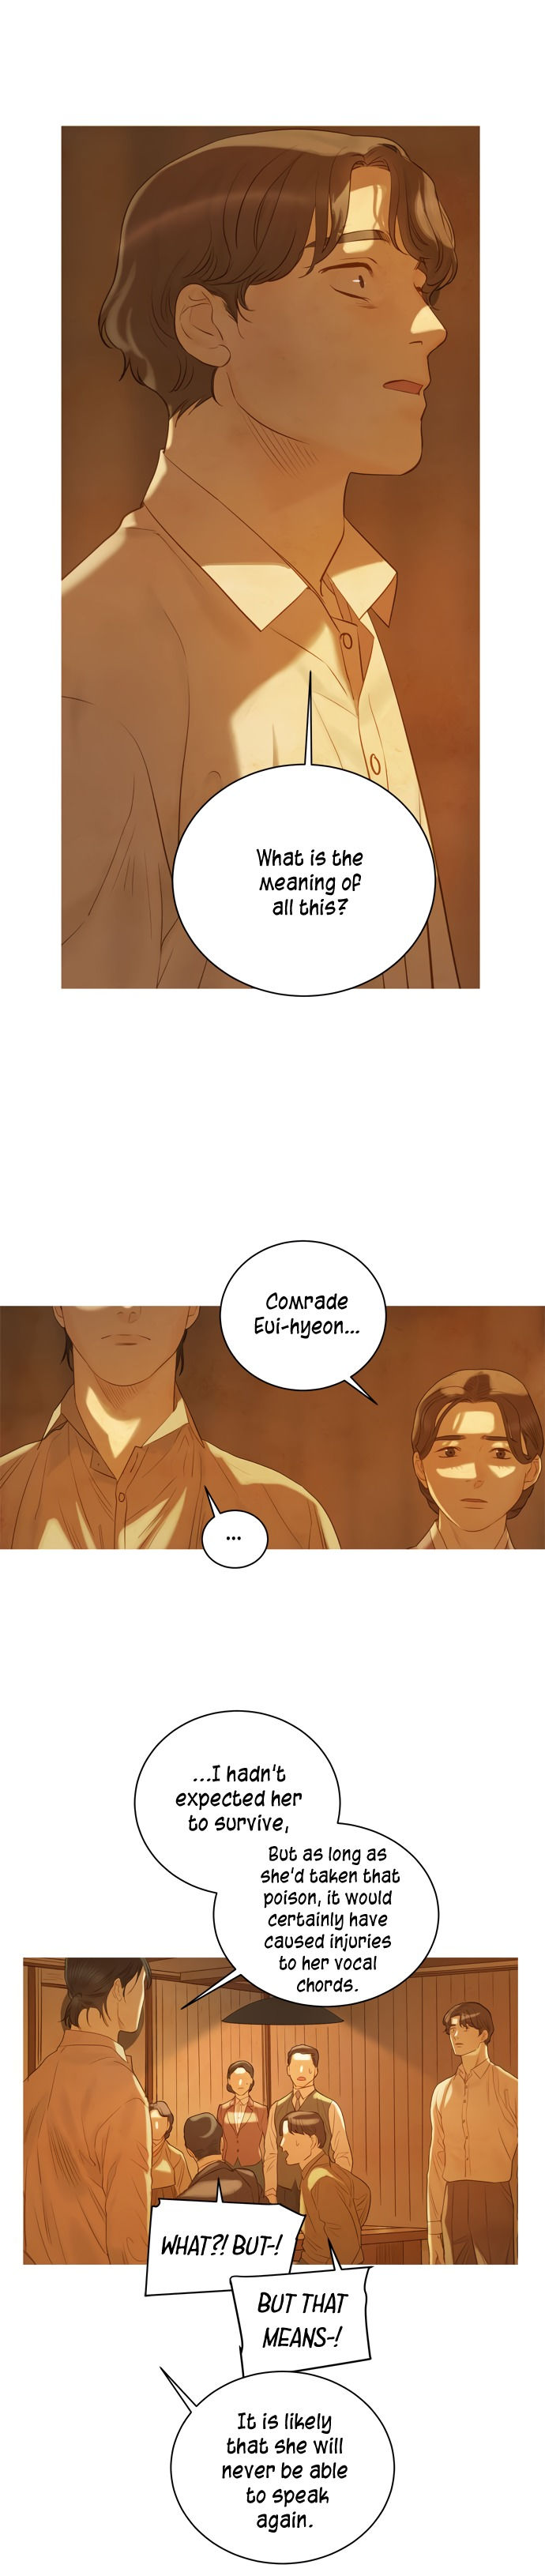 Gorae Byul - The Gyeongseong Mermaid - Chapter 18 Page 18